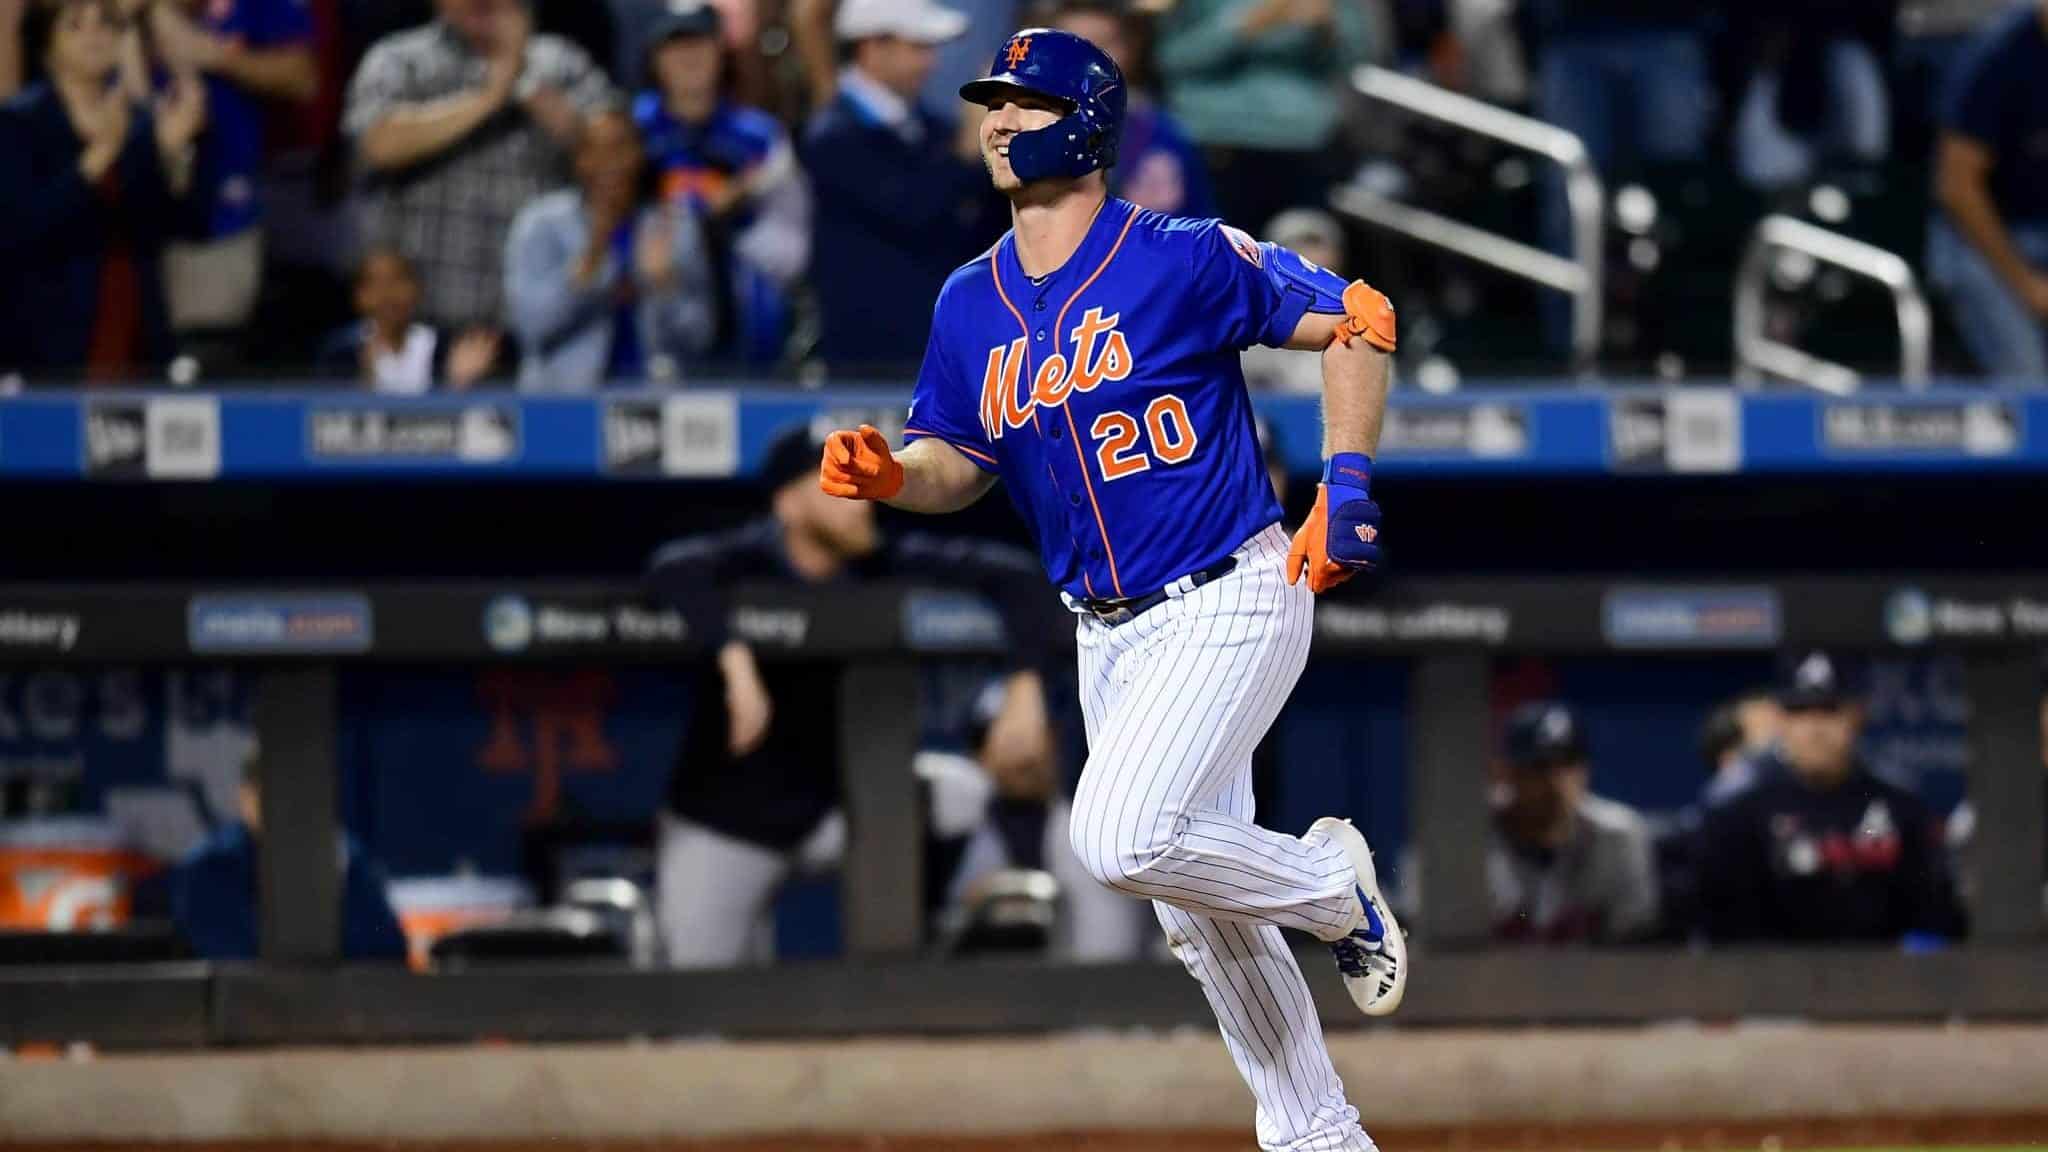 NEW YORK, NEW YORK - SEPTEMBER 27: Pete Alonso #20 of the New York Mets smiles as he runs the bases after hitting a home run in the first inning of their game against the Atlanta Braves, his 52nd home run of the season and tying Aaron Judge's rookie home run record, during their game at Citi Field on September 27, 2019 in the Flushing neighborhood of the Queens borough of New York City.